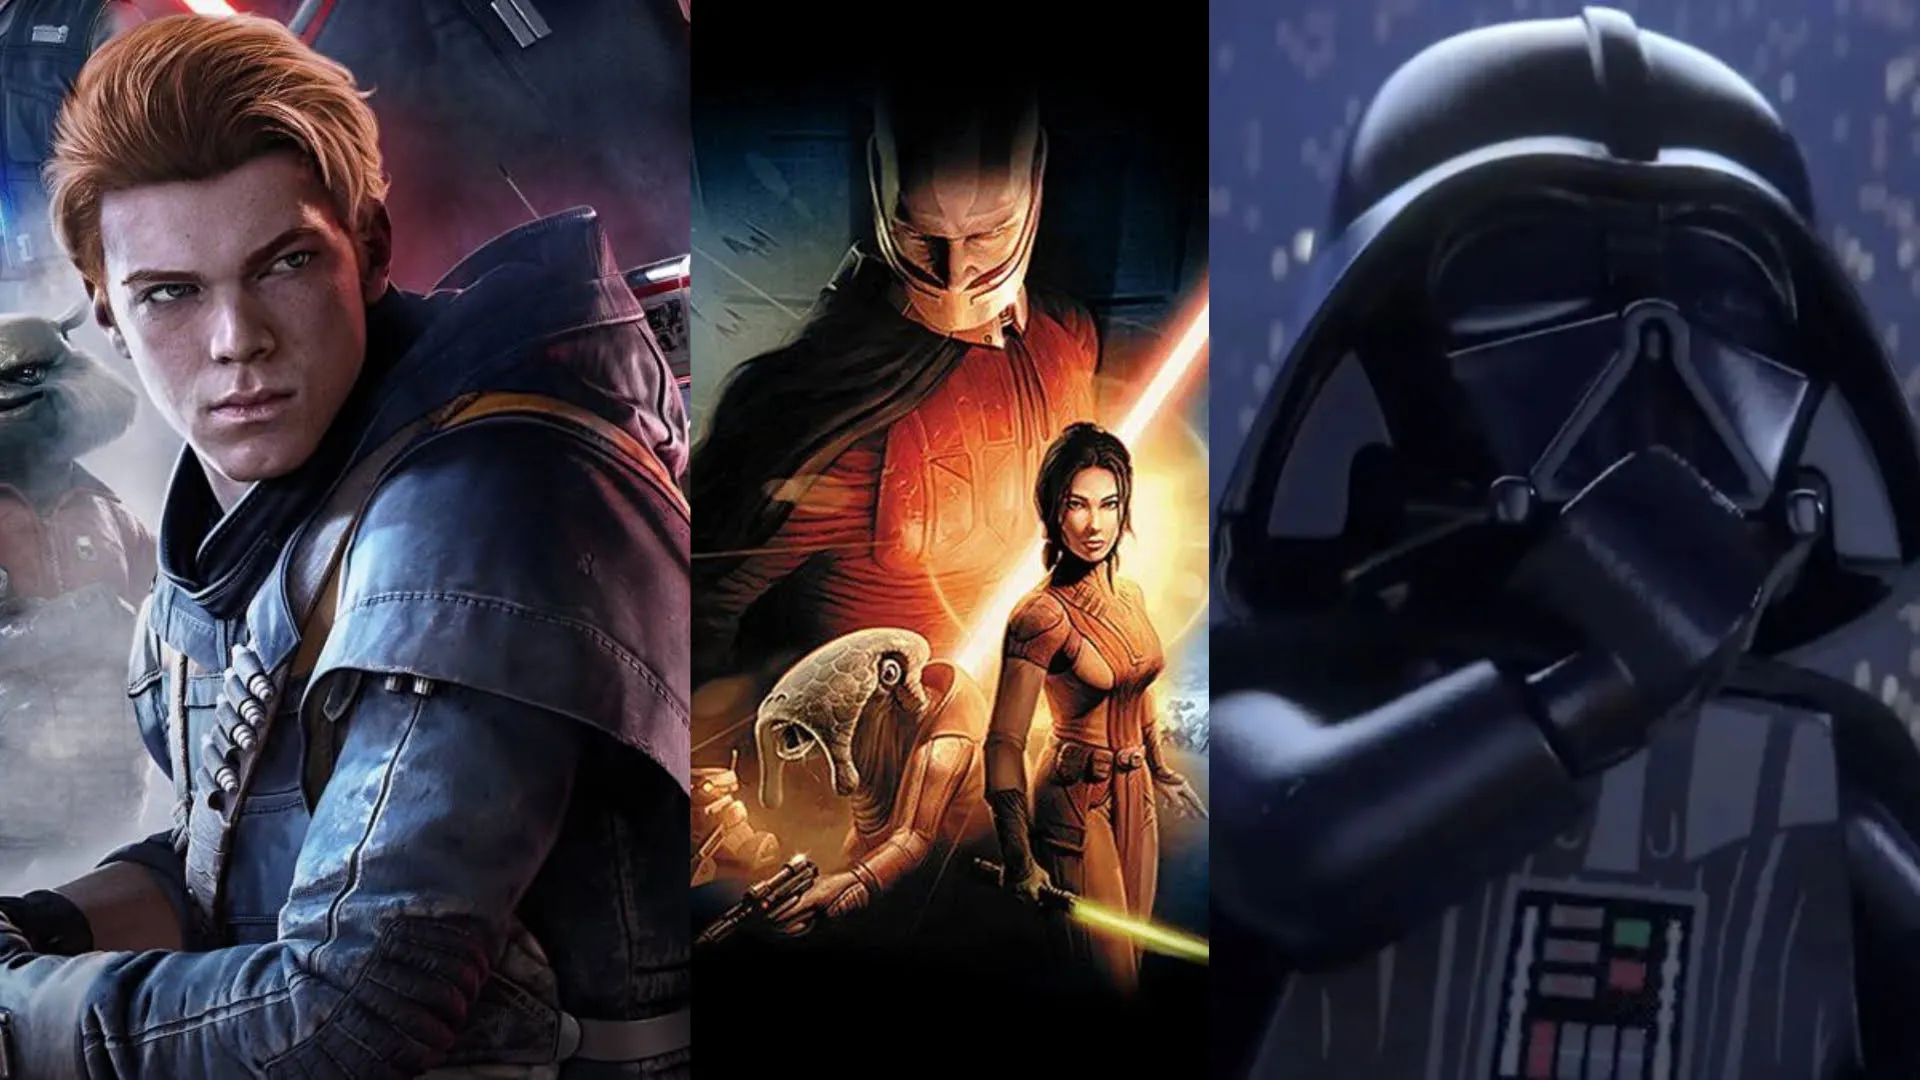 Dokument skål indelukke 10 of the best Star Wars games you can play on PC